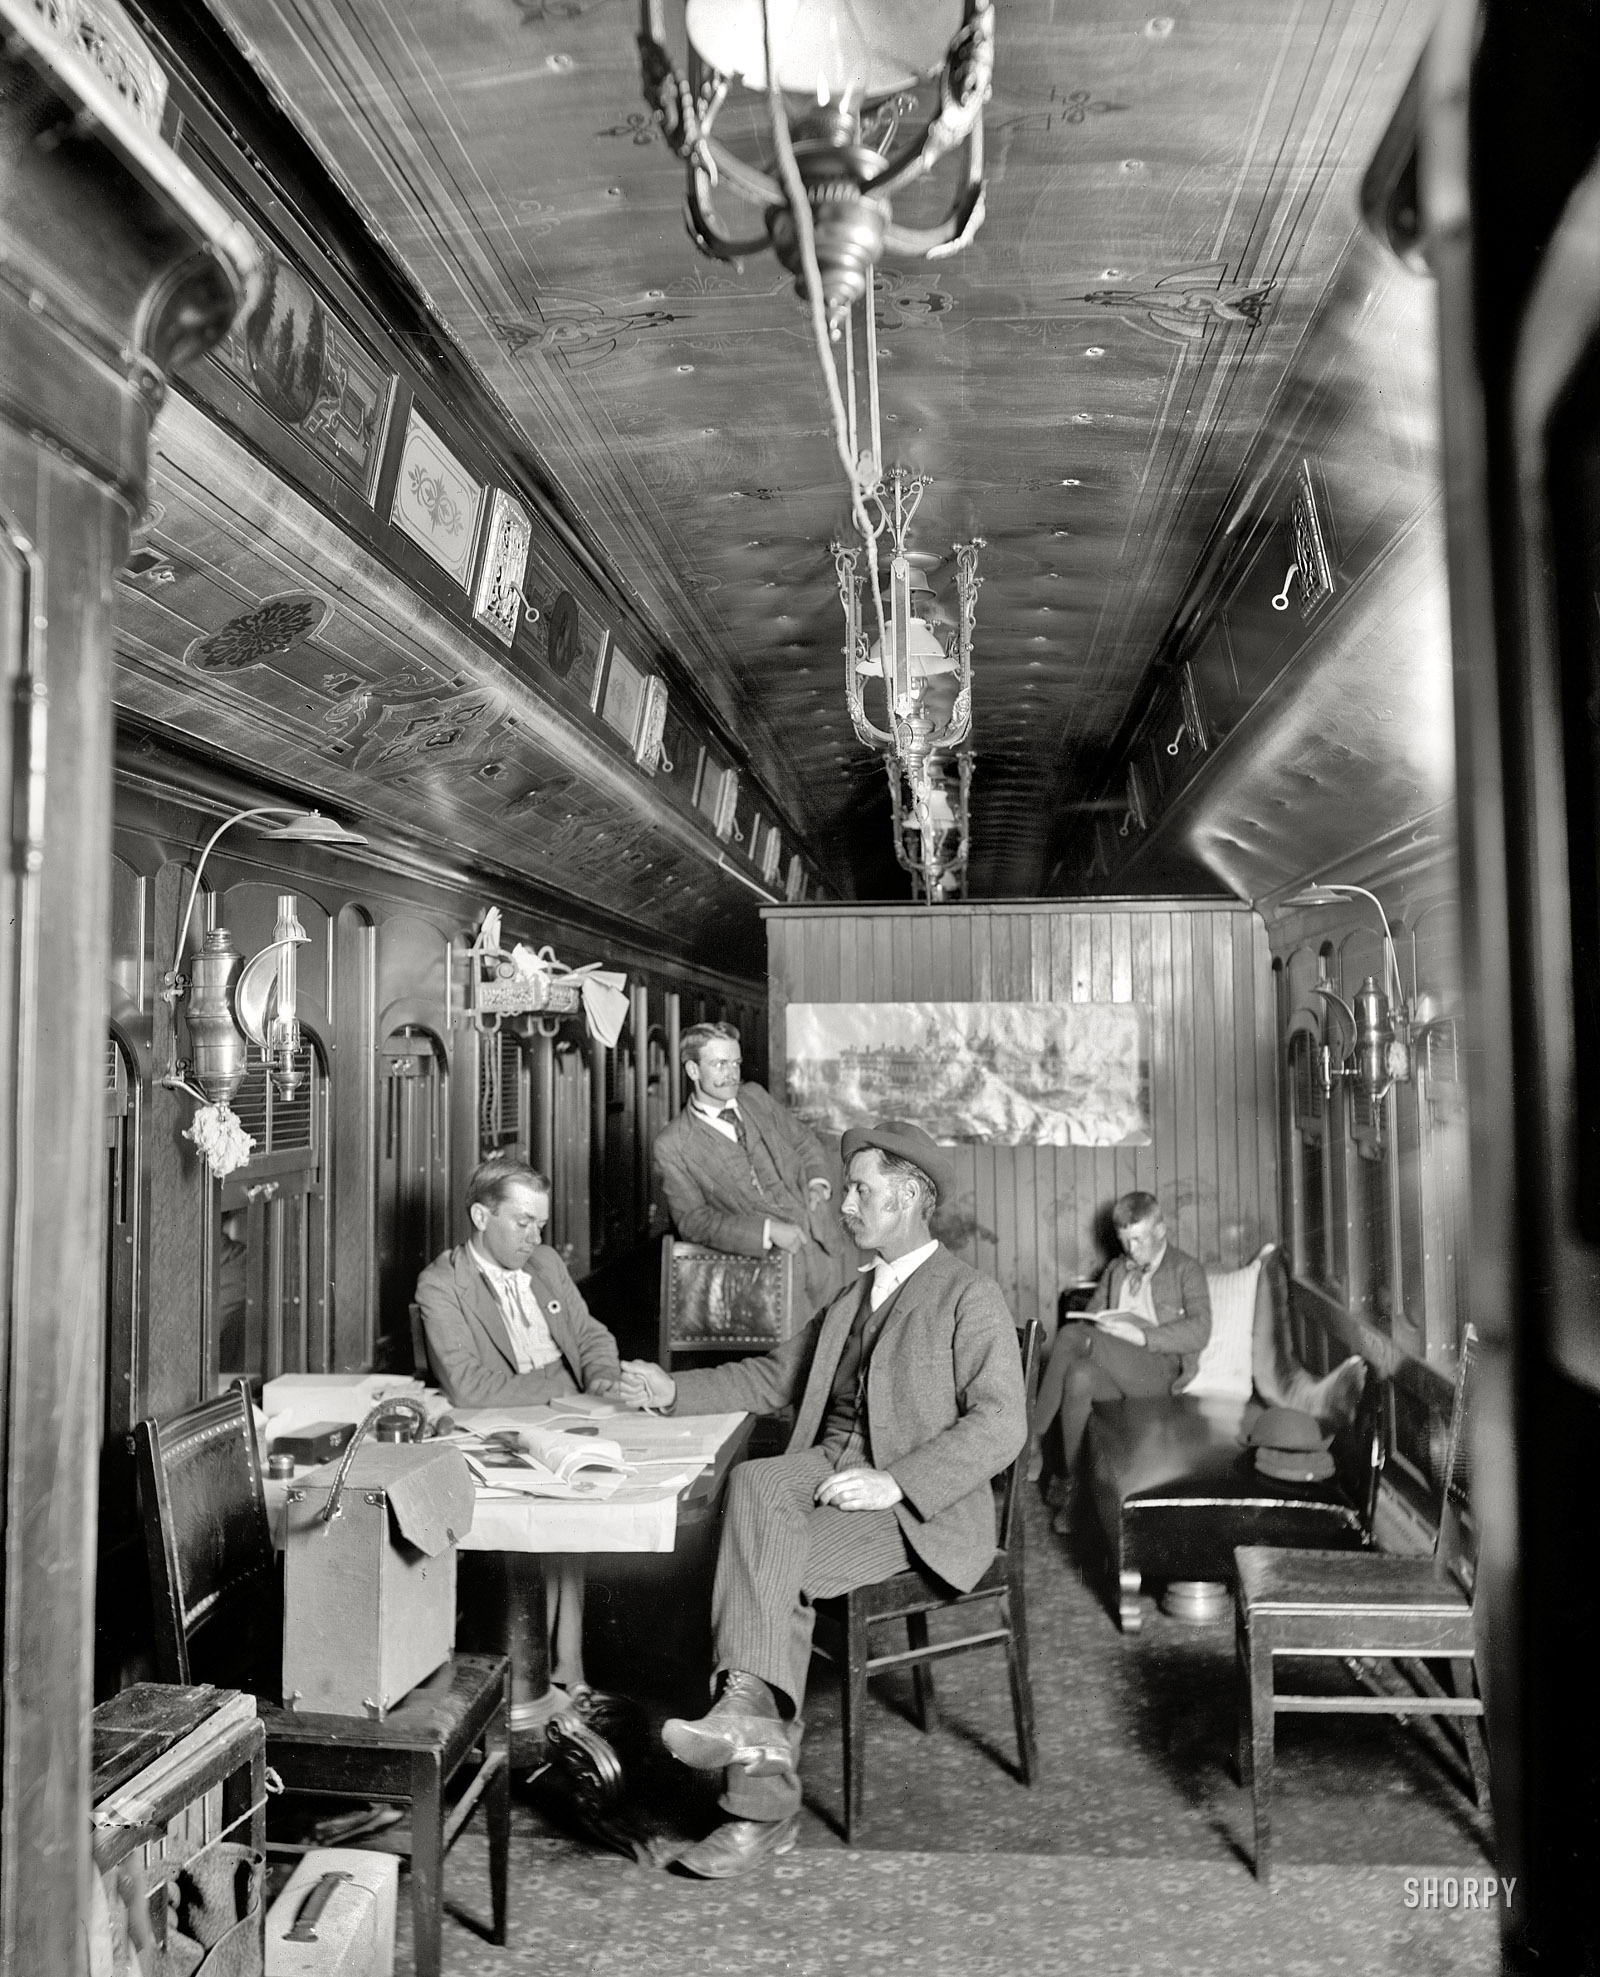 Circa 1900. "New York Central R.R. photographic car." Possibly one of the "specials" reserved by DPC for the use of its photographers as they traveled around the Northeast. Detroit Photographic Co. glass negative. View full size.